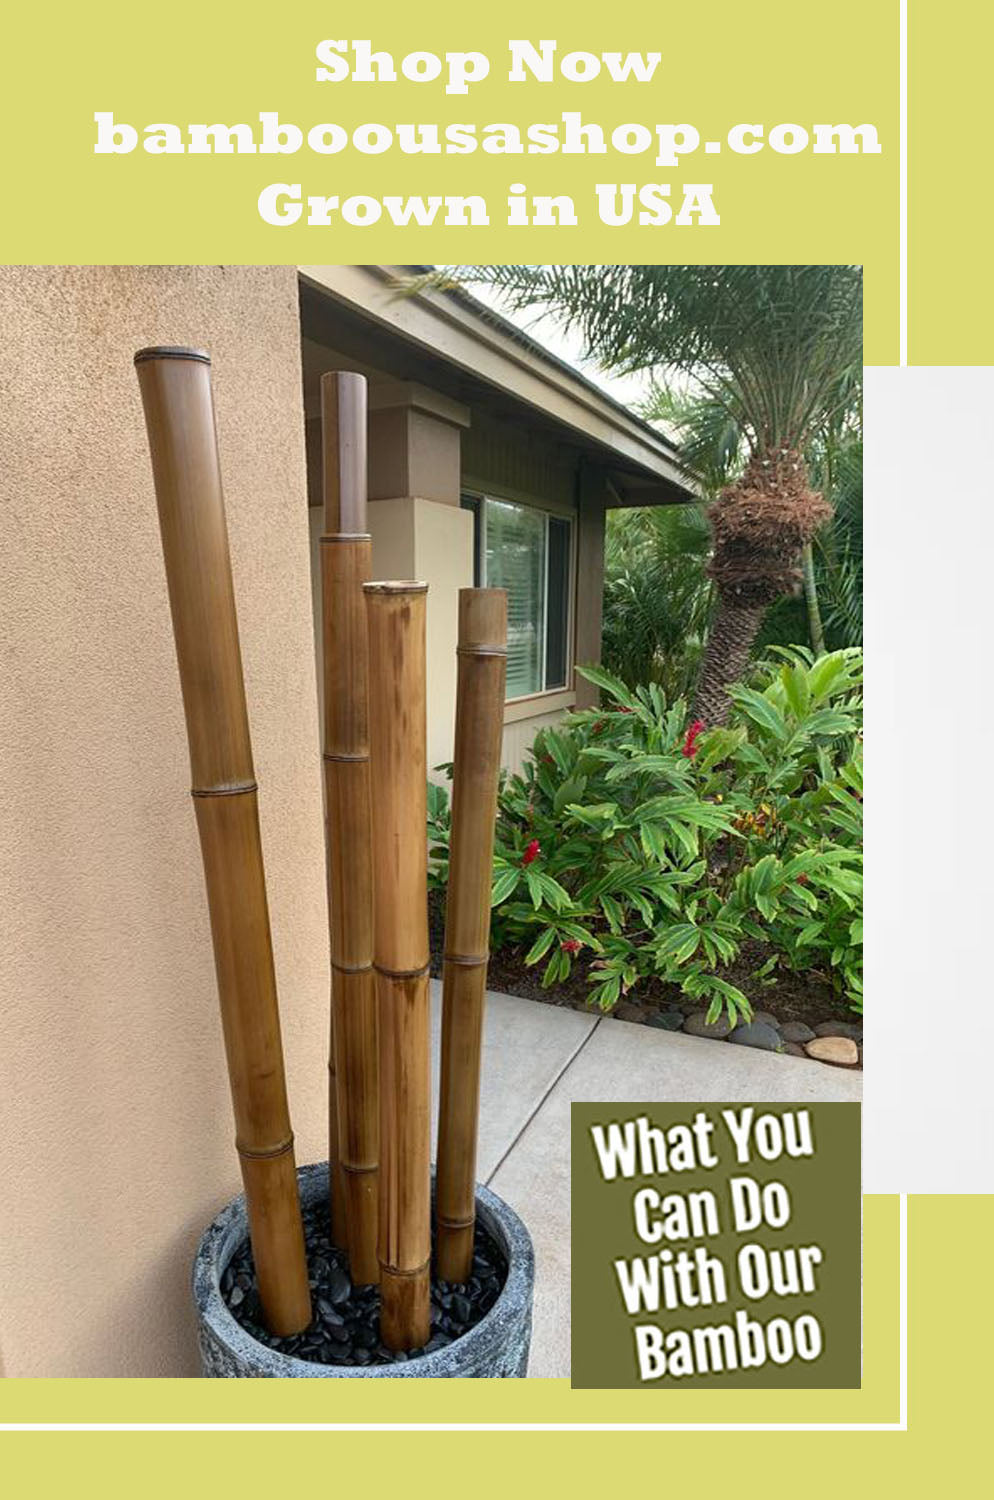 34 ideas for decorative bamboo poles – how to use them creatively